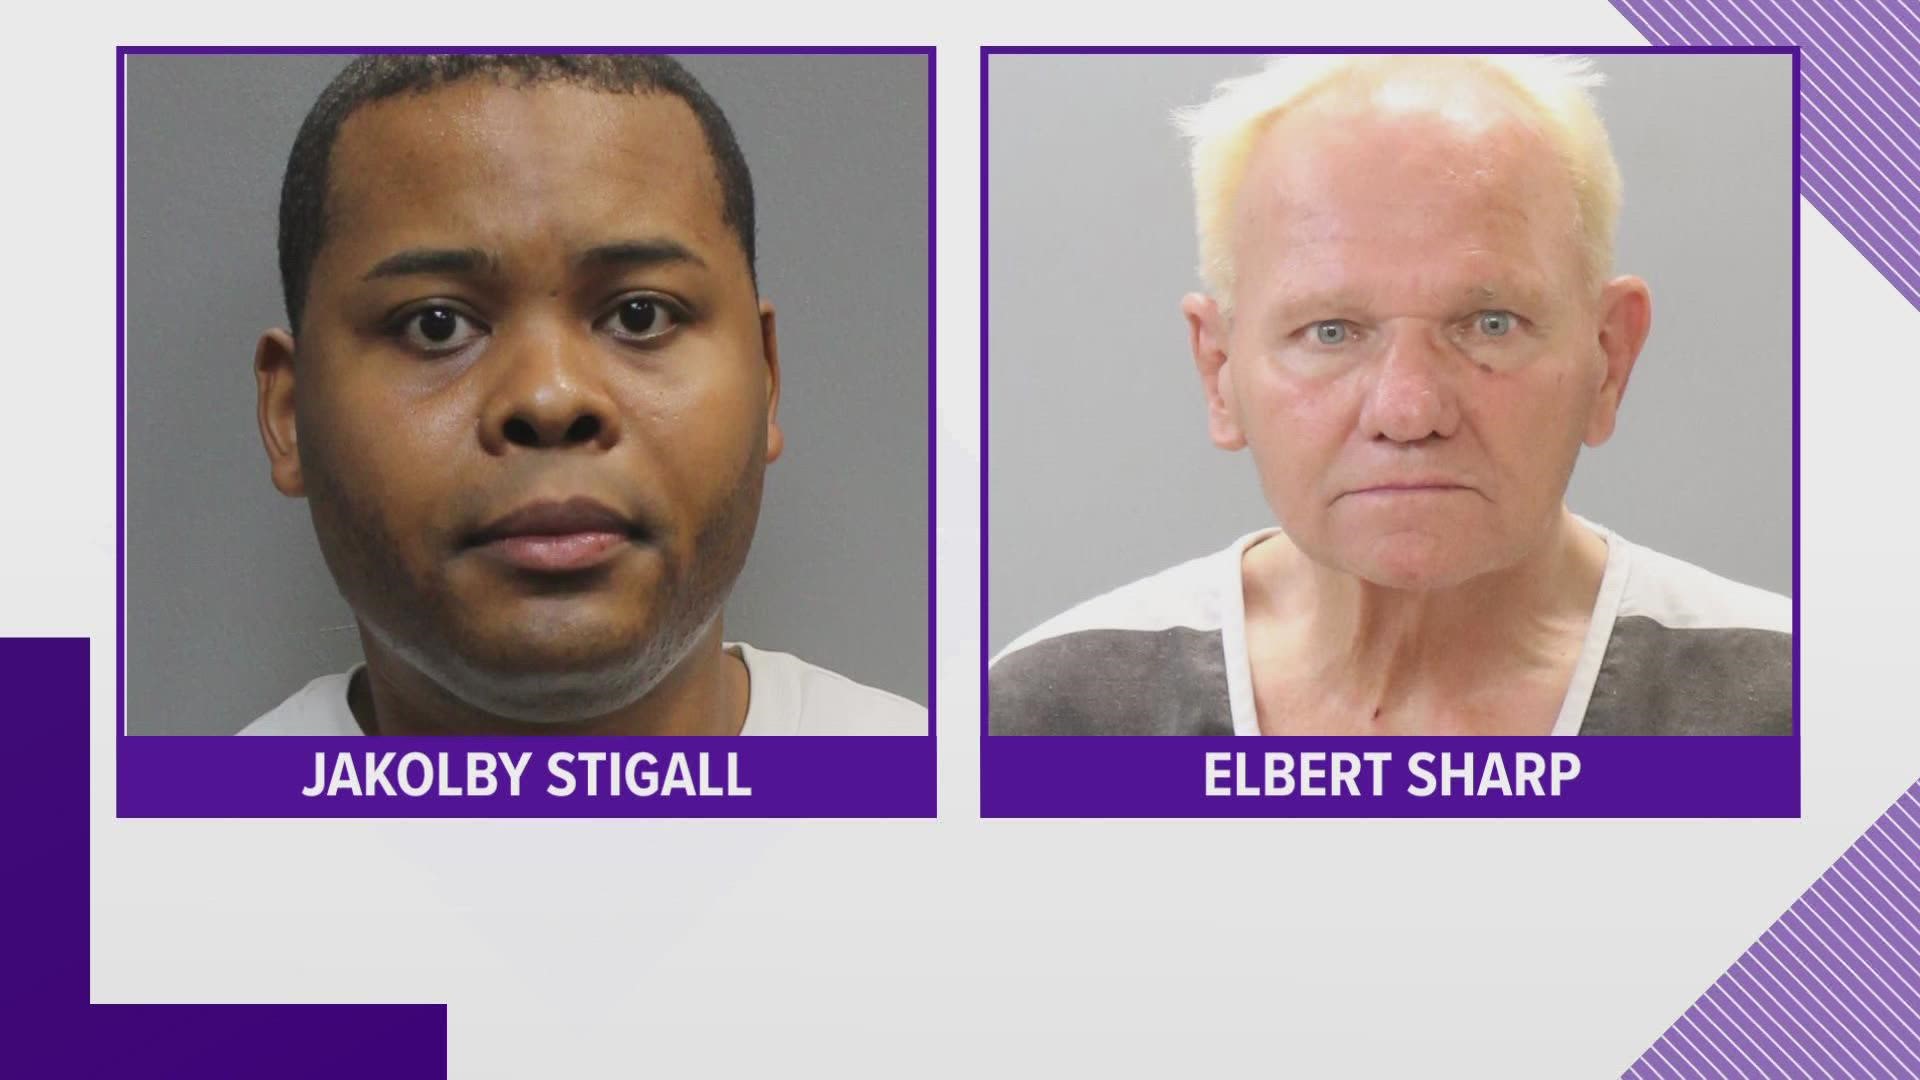 Jakolby Stigall and Elbert Sharp are facing charges after KCSO said one of the men grabbed a vulnerable man by his feet and dragged him across a driveway.